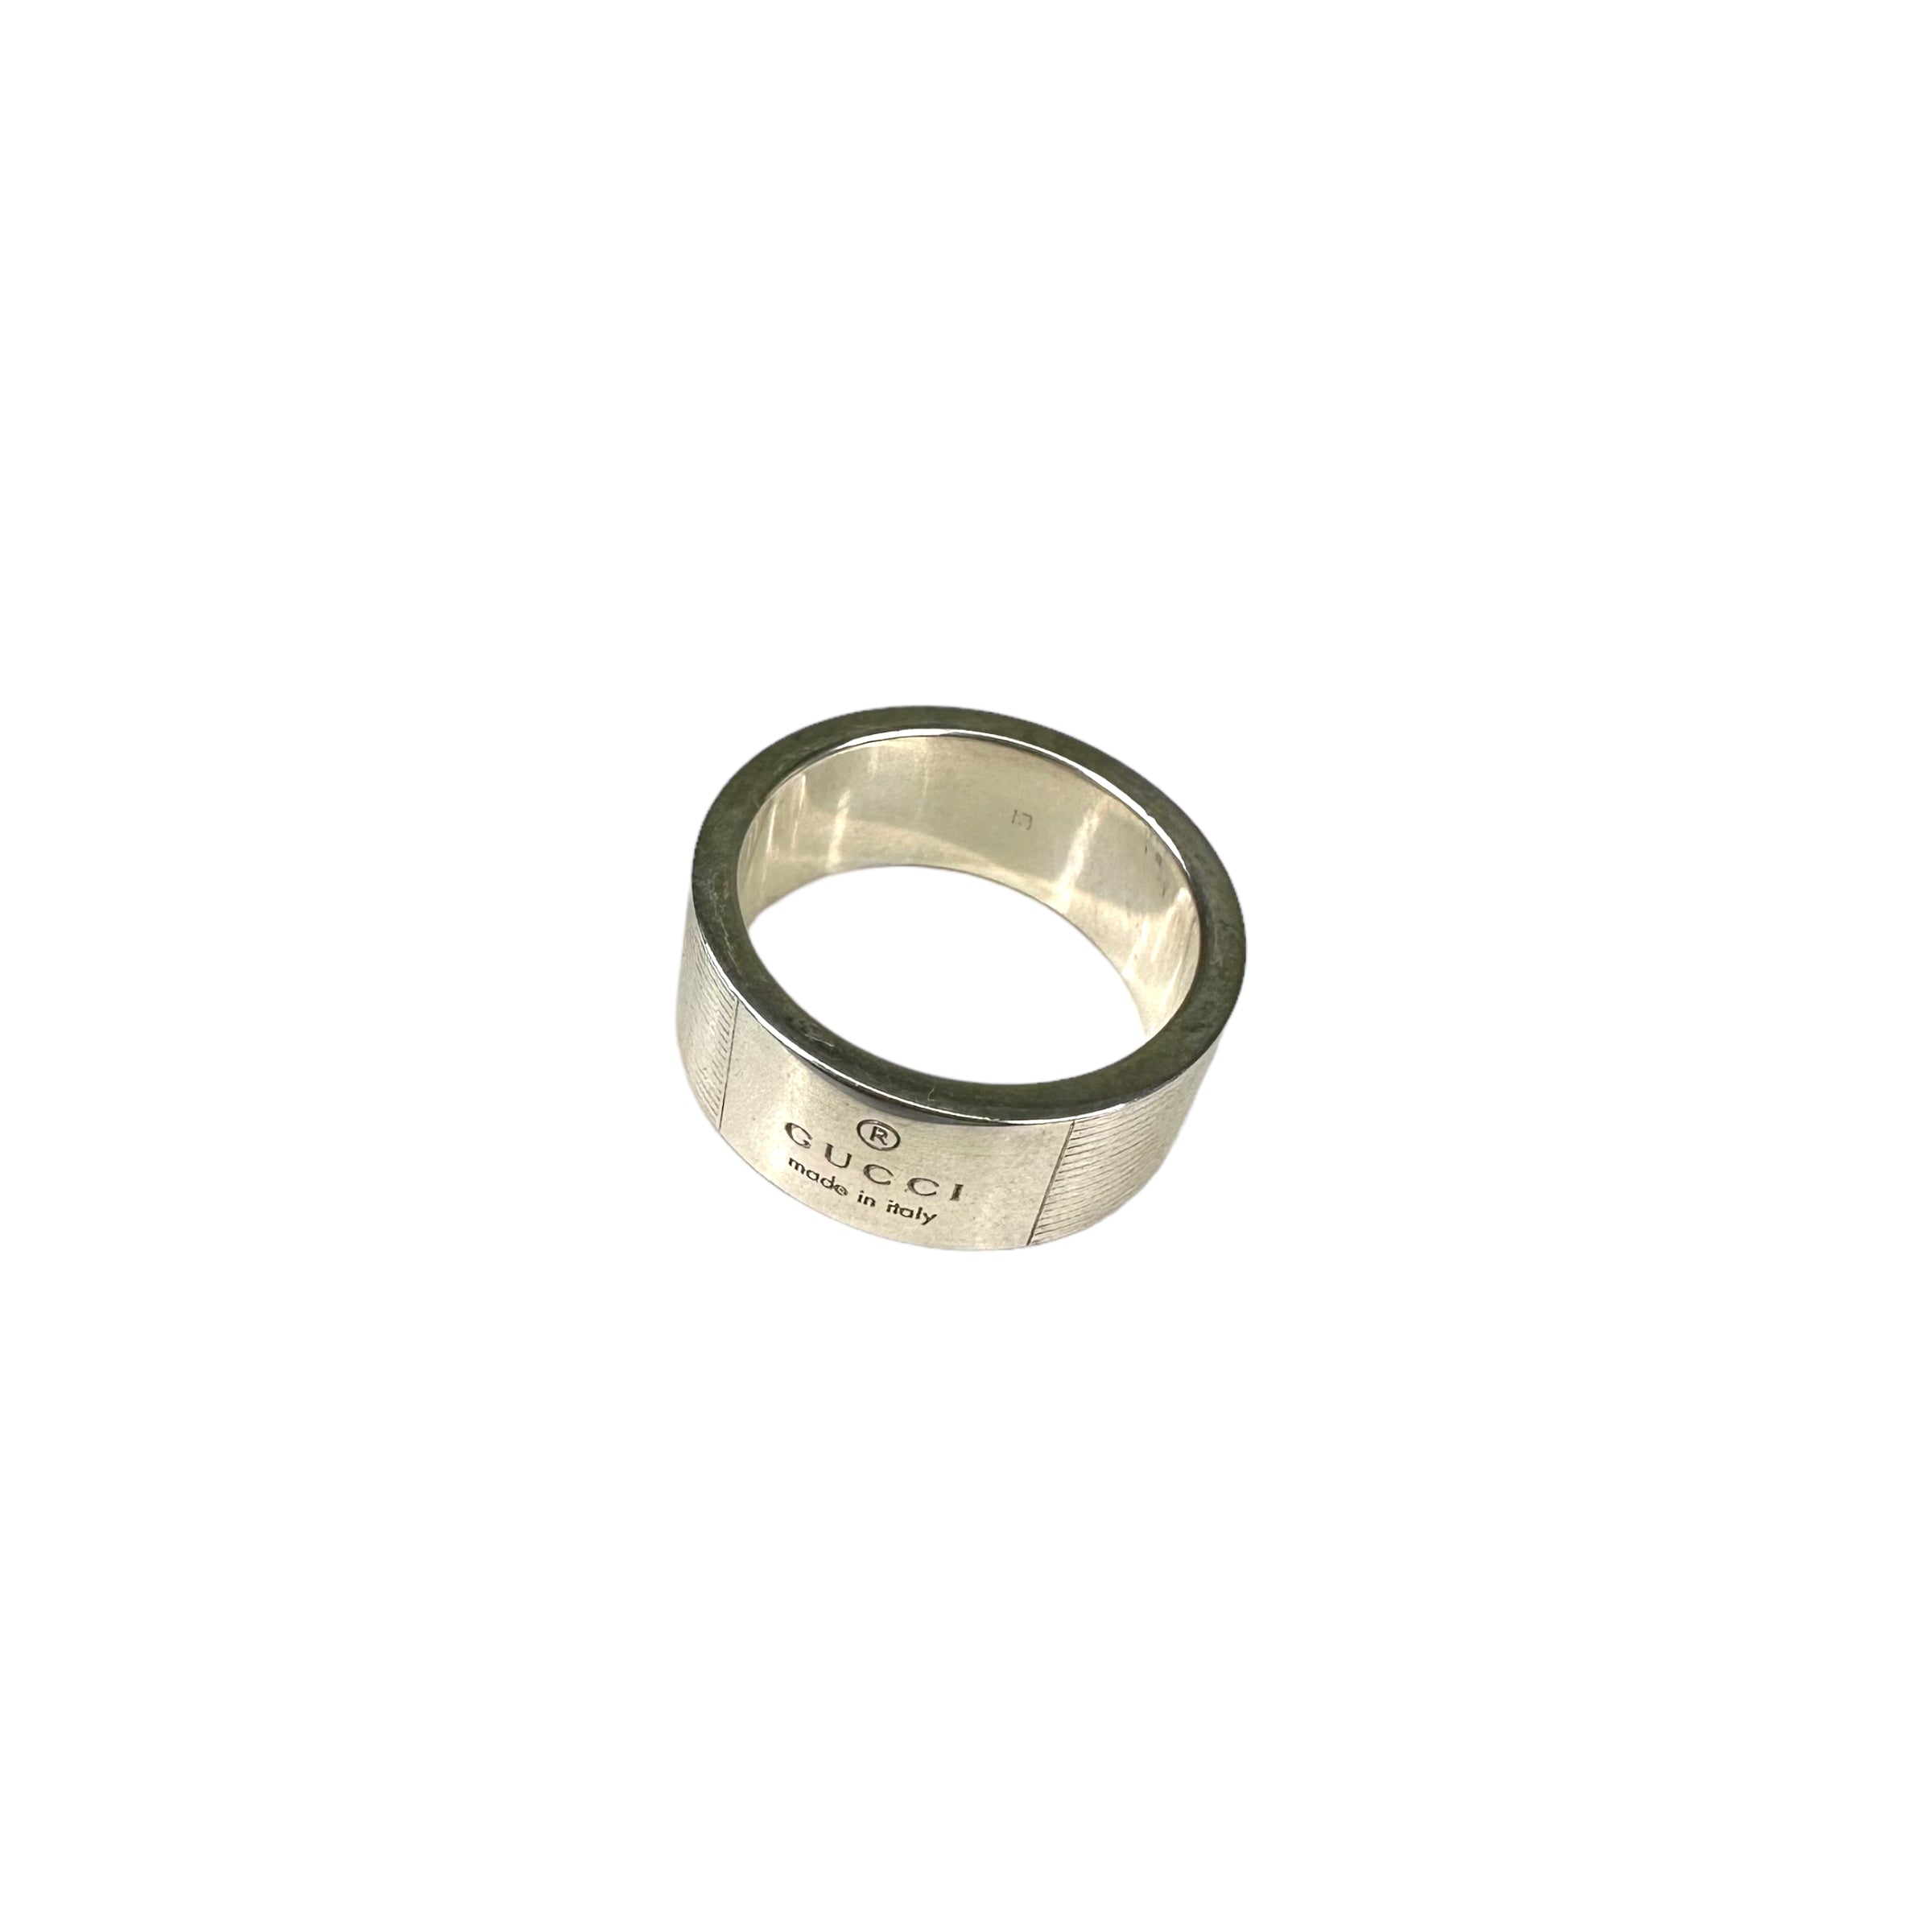 GUCCI ENGRAVED SPELLOUT RING